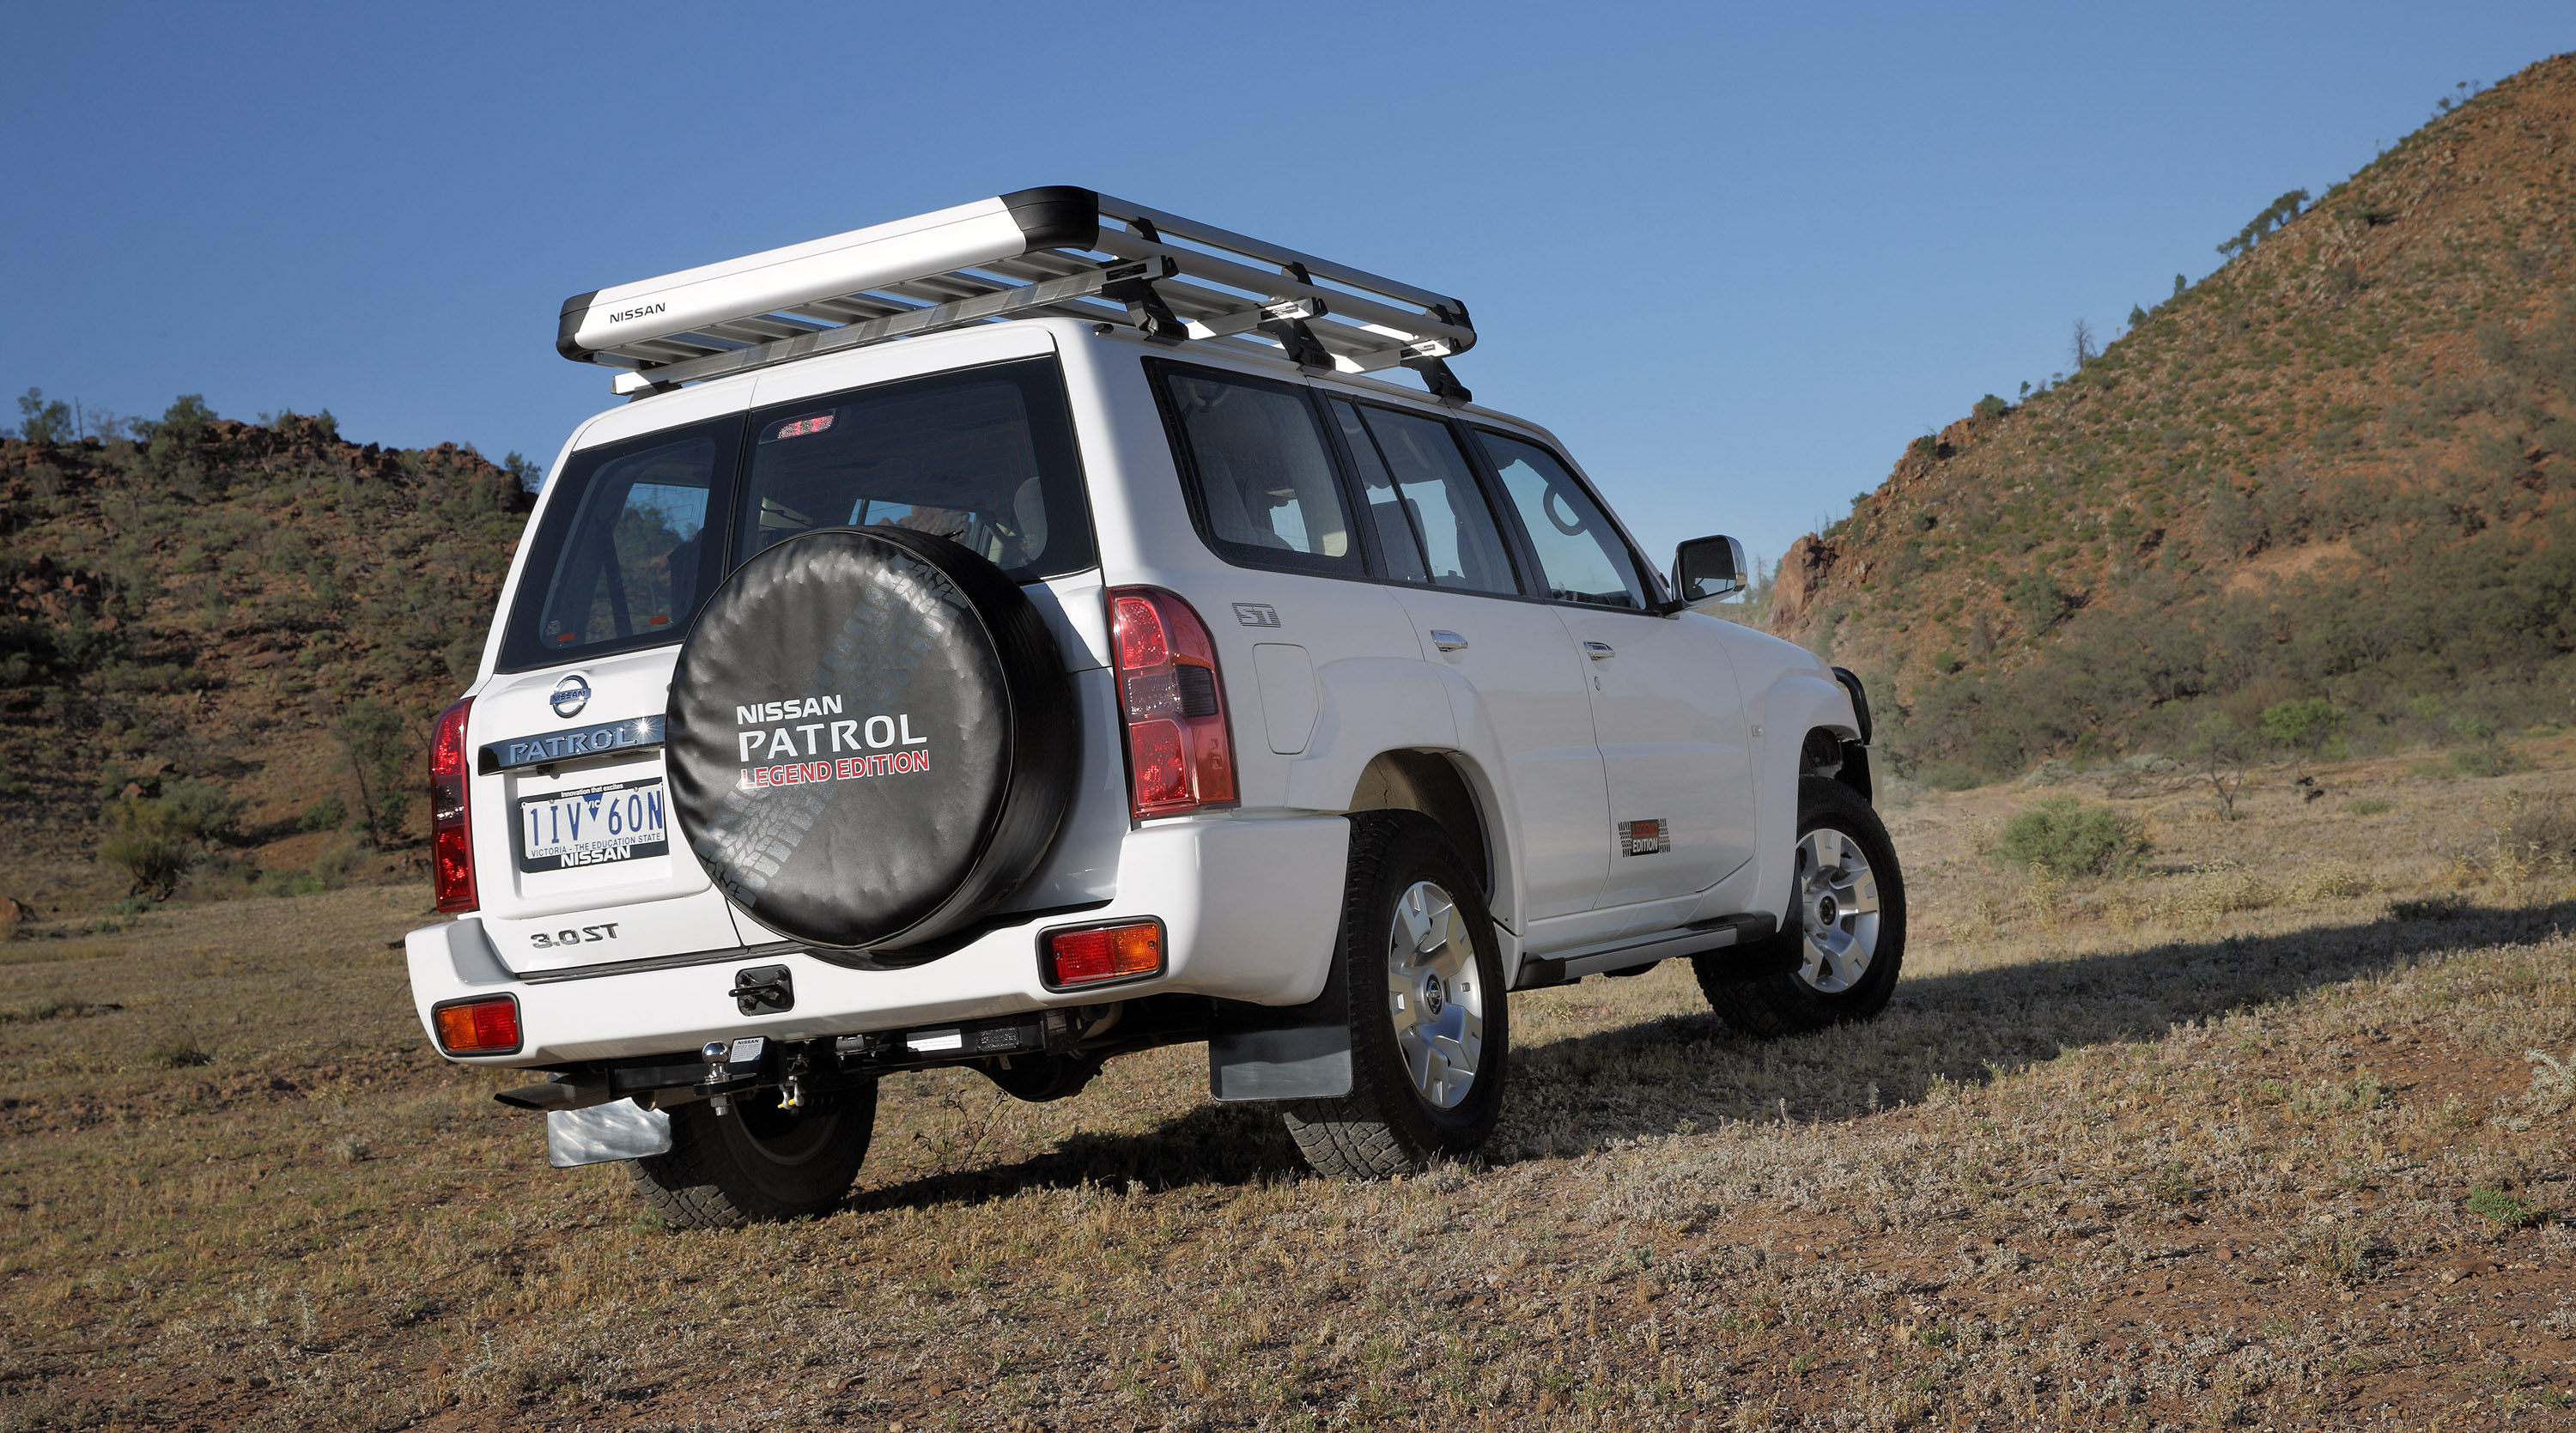 Nissan Y61 Patrol Legend Edition launched as swansong for hard-working